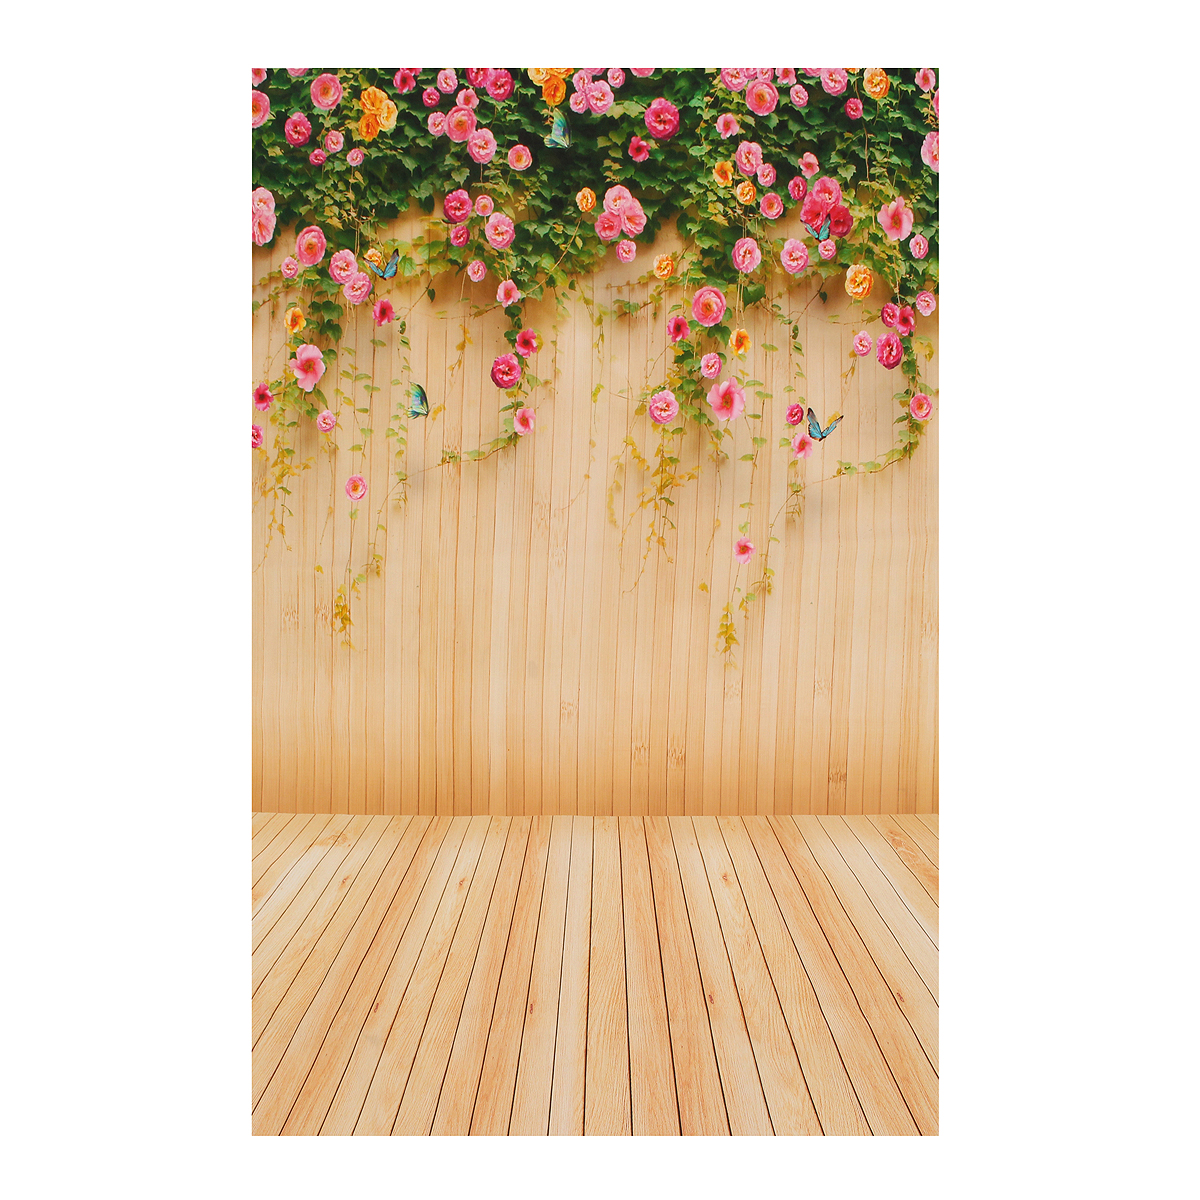 Mohoo-15x21m-Flowers-Wooden-Board-Studio-Props-Photography-Backdrop-Background-Silk-Material-1958137-1